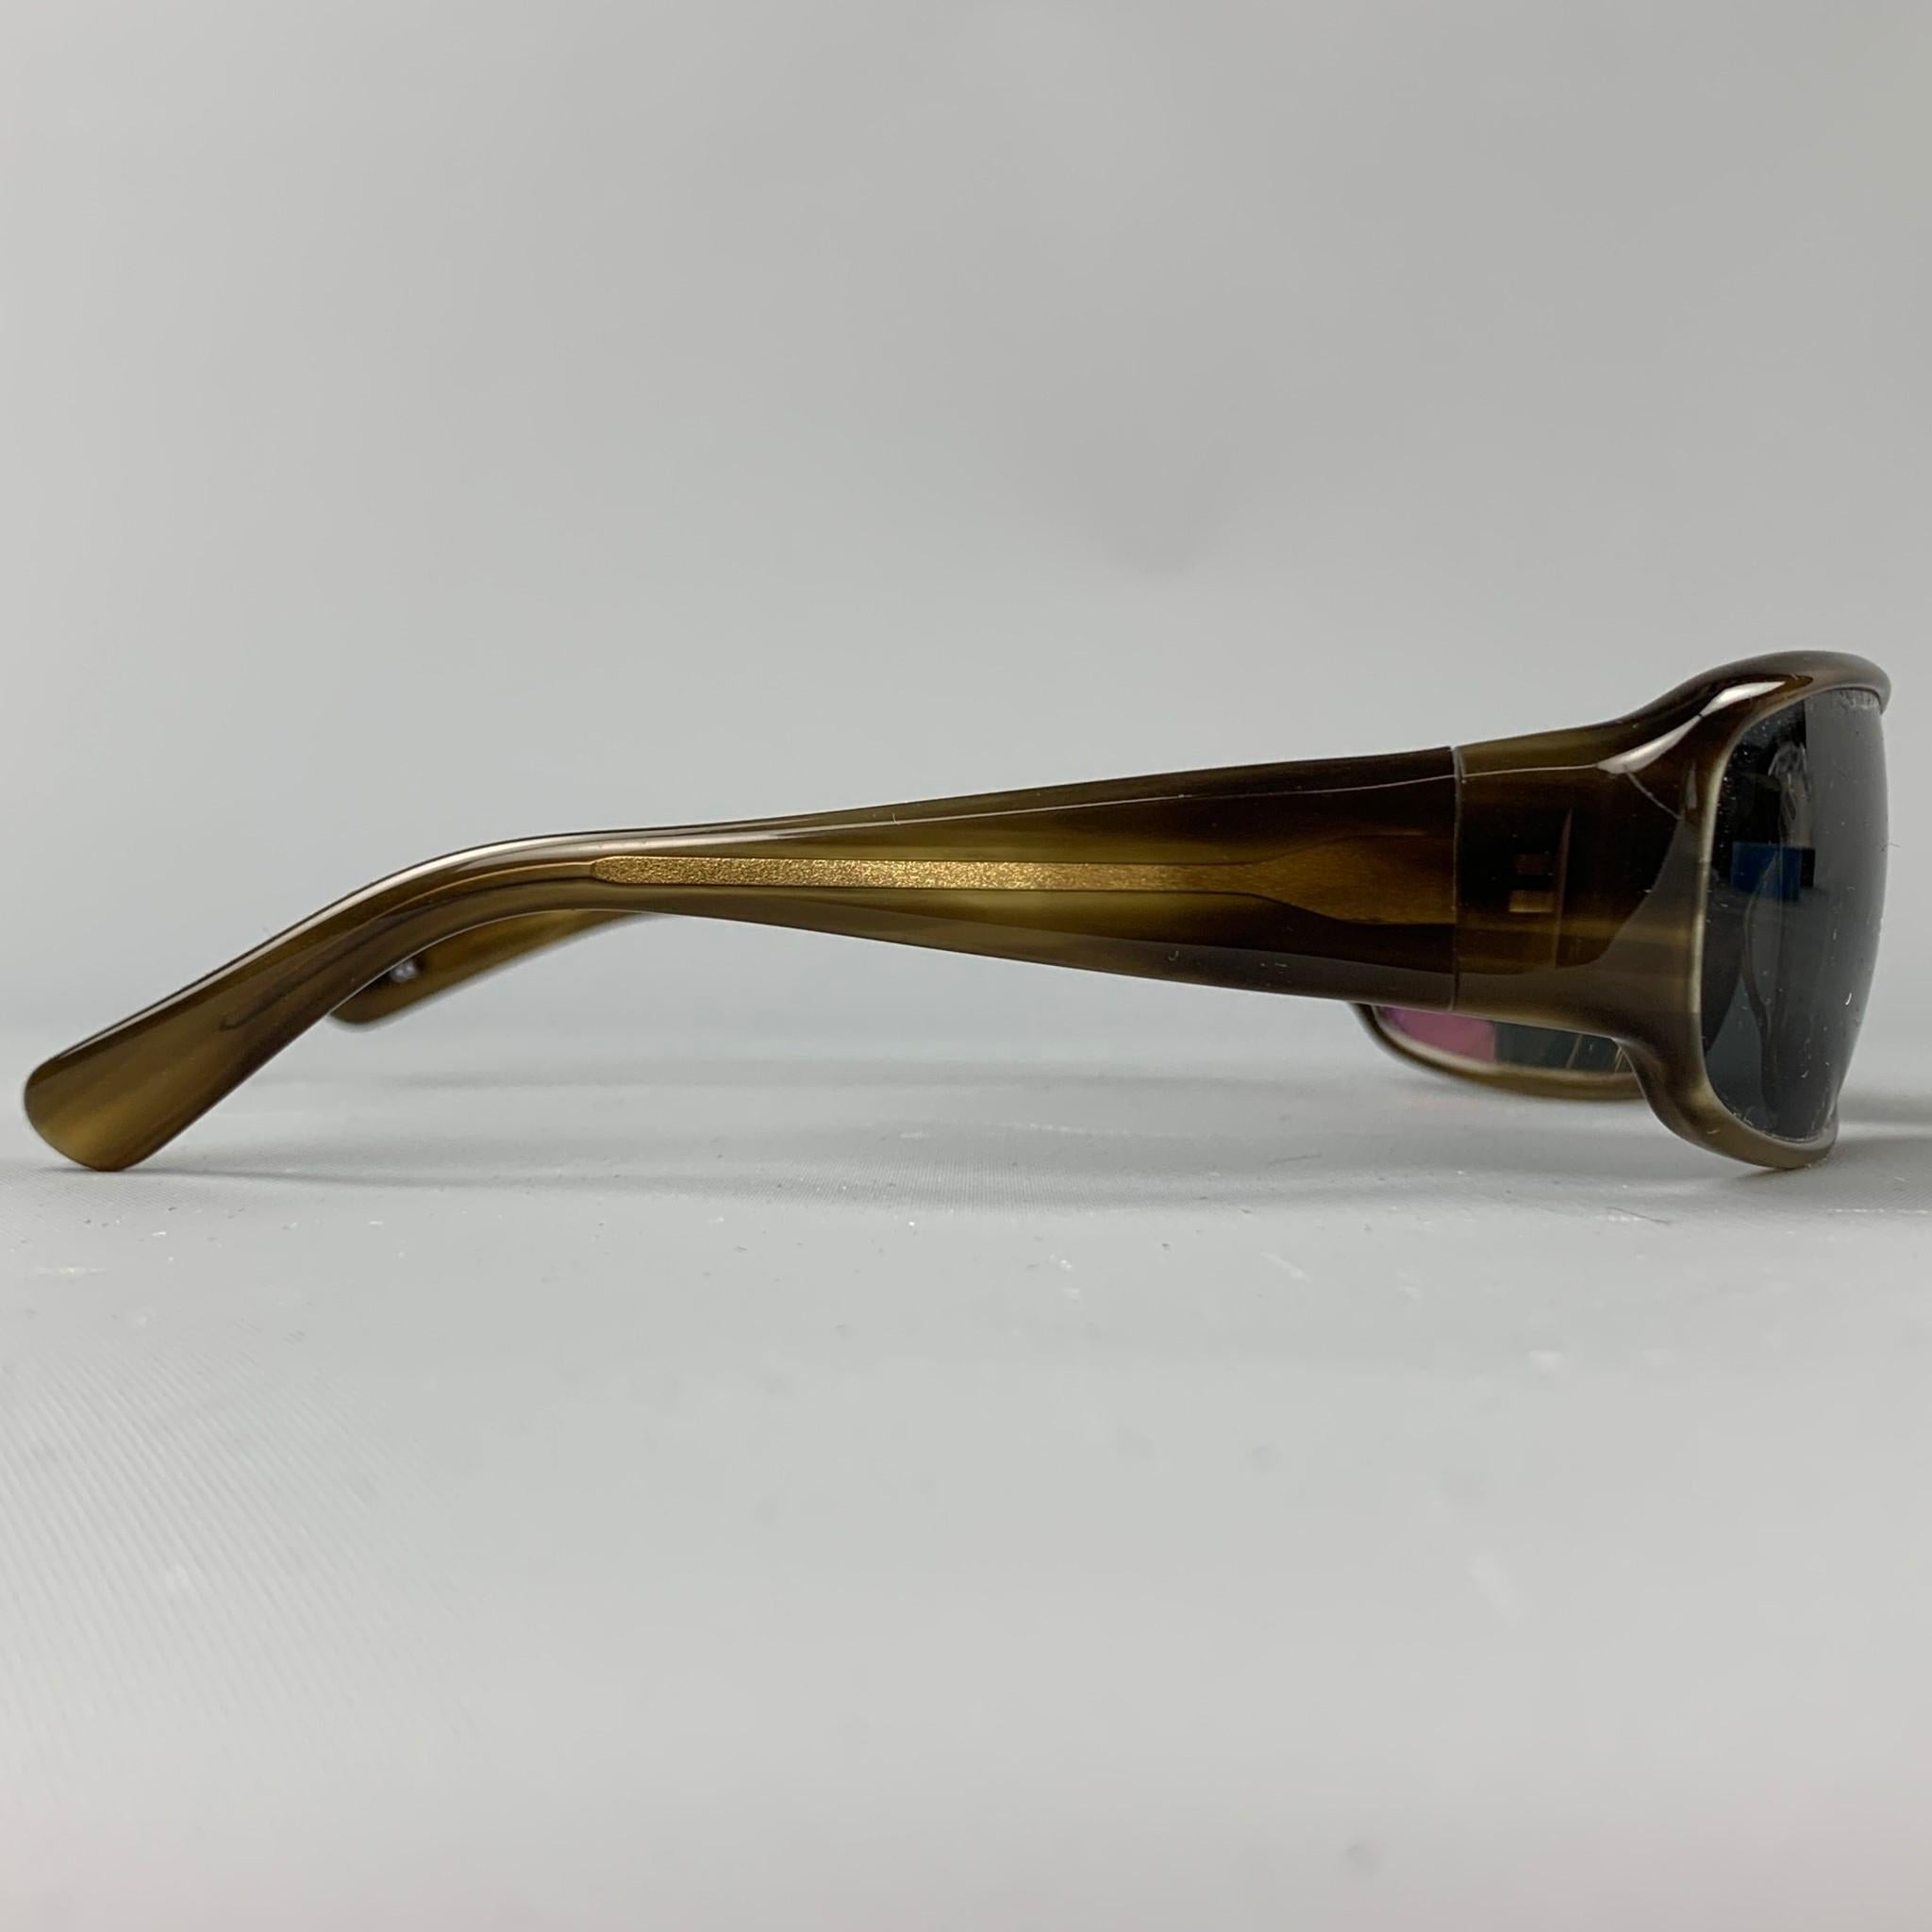 OLIVER PEOPLES sunglasses comes in a brown acetate featuring polarized lenses. Comes with case. Made in Japan.

Good Pre-Owned Condition.
Marked: 64-17-110

Measurements:

Length: 12 cm.
Height: 3.5 cm. 